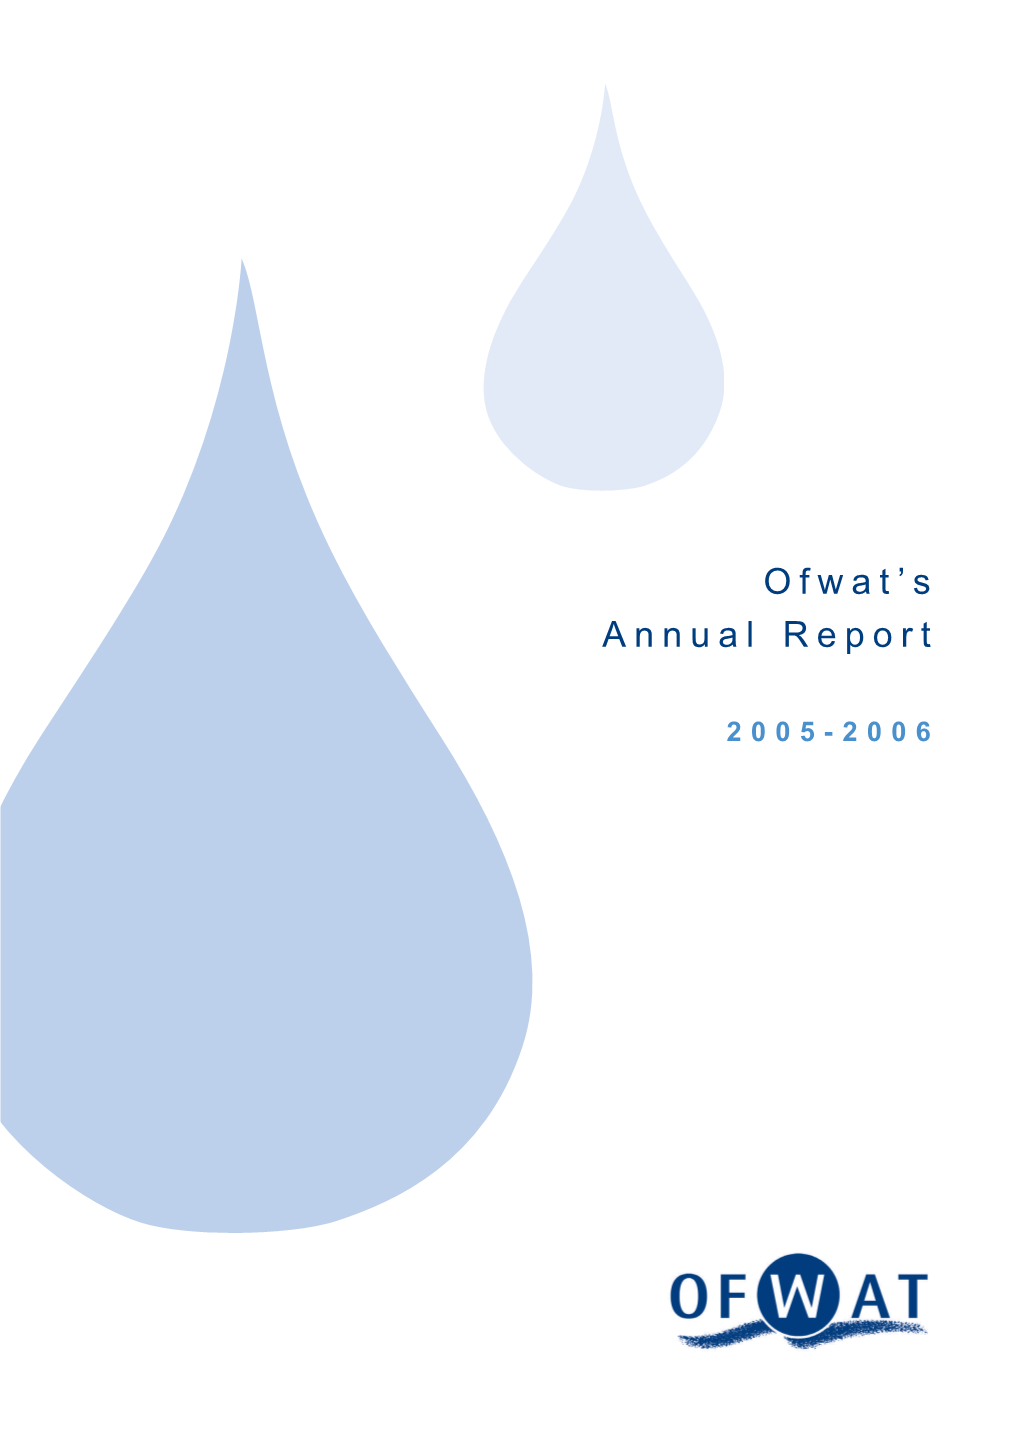 Ofwat's Annual Report